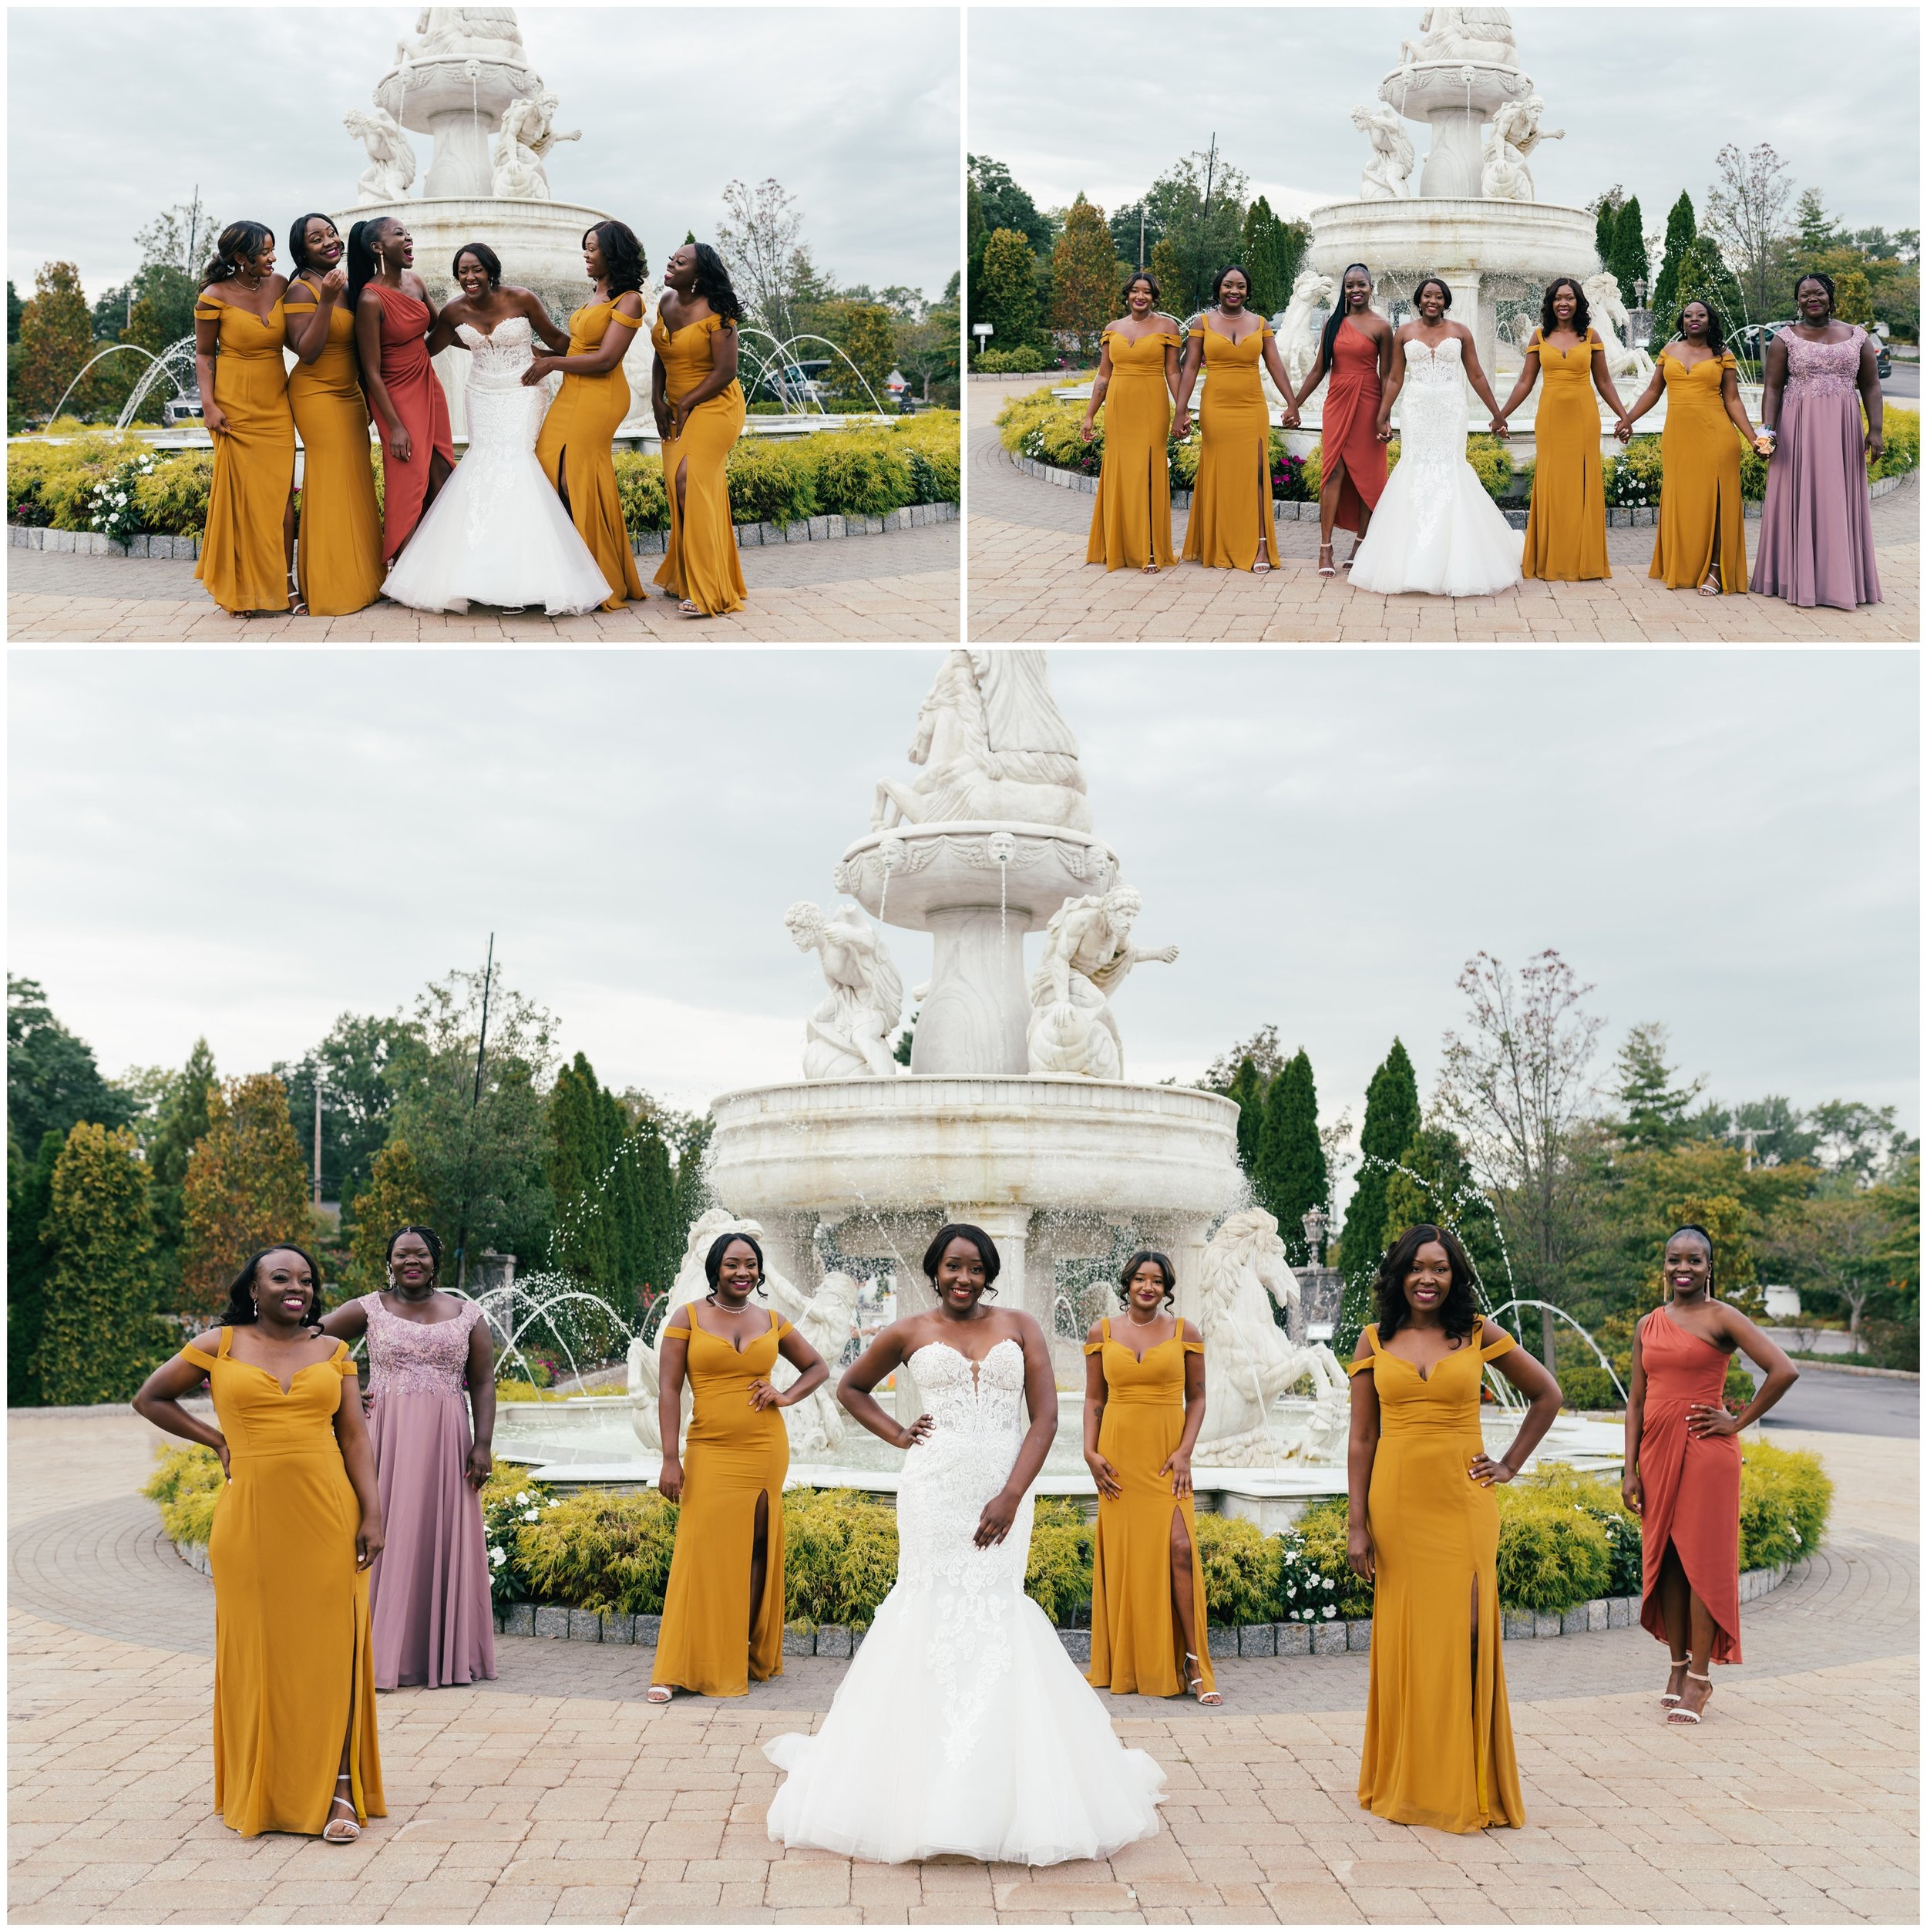 Black bridesmaids in formation in front of a grand fountain wearing mustard yellow dresses. 